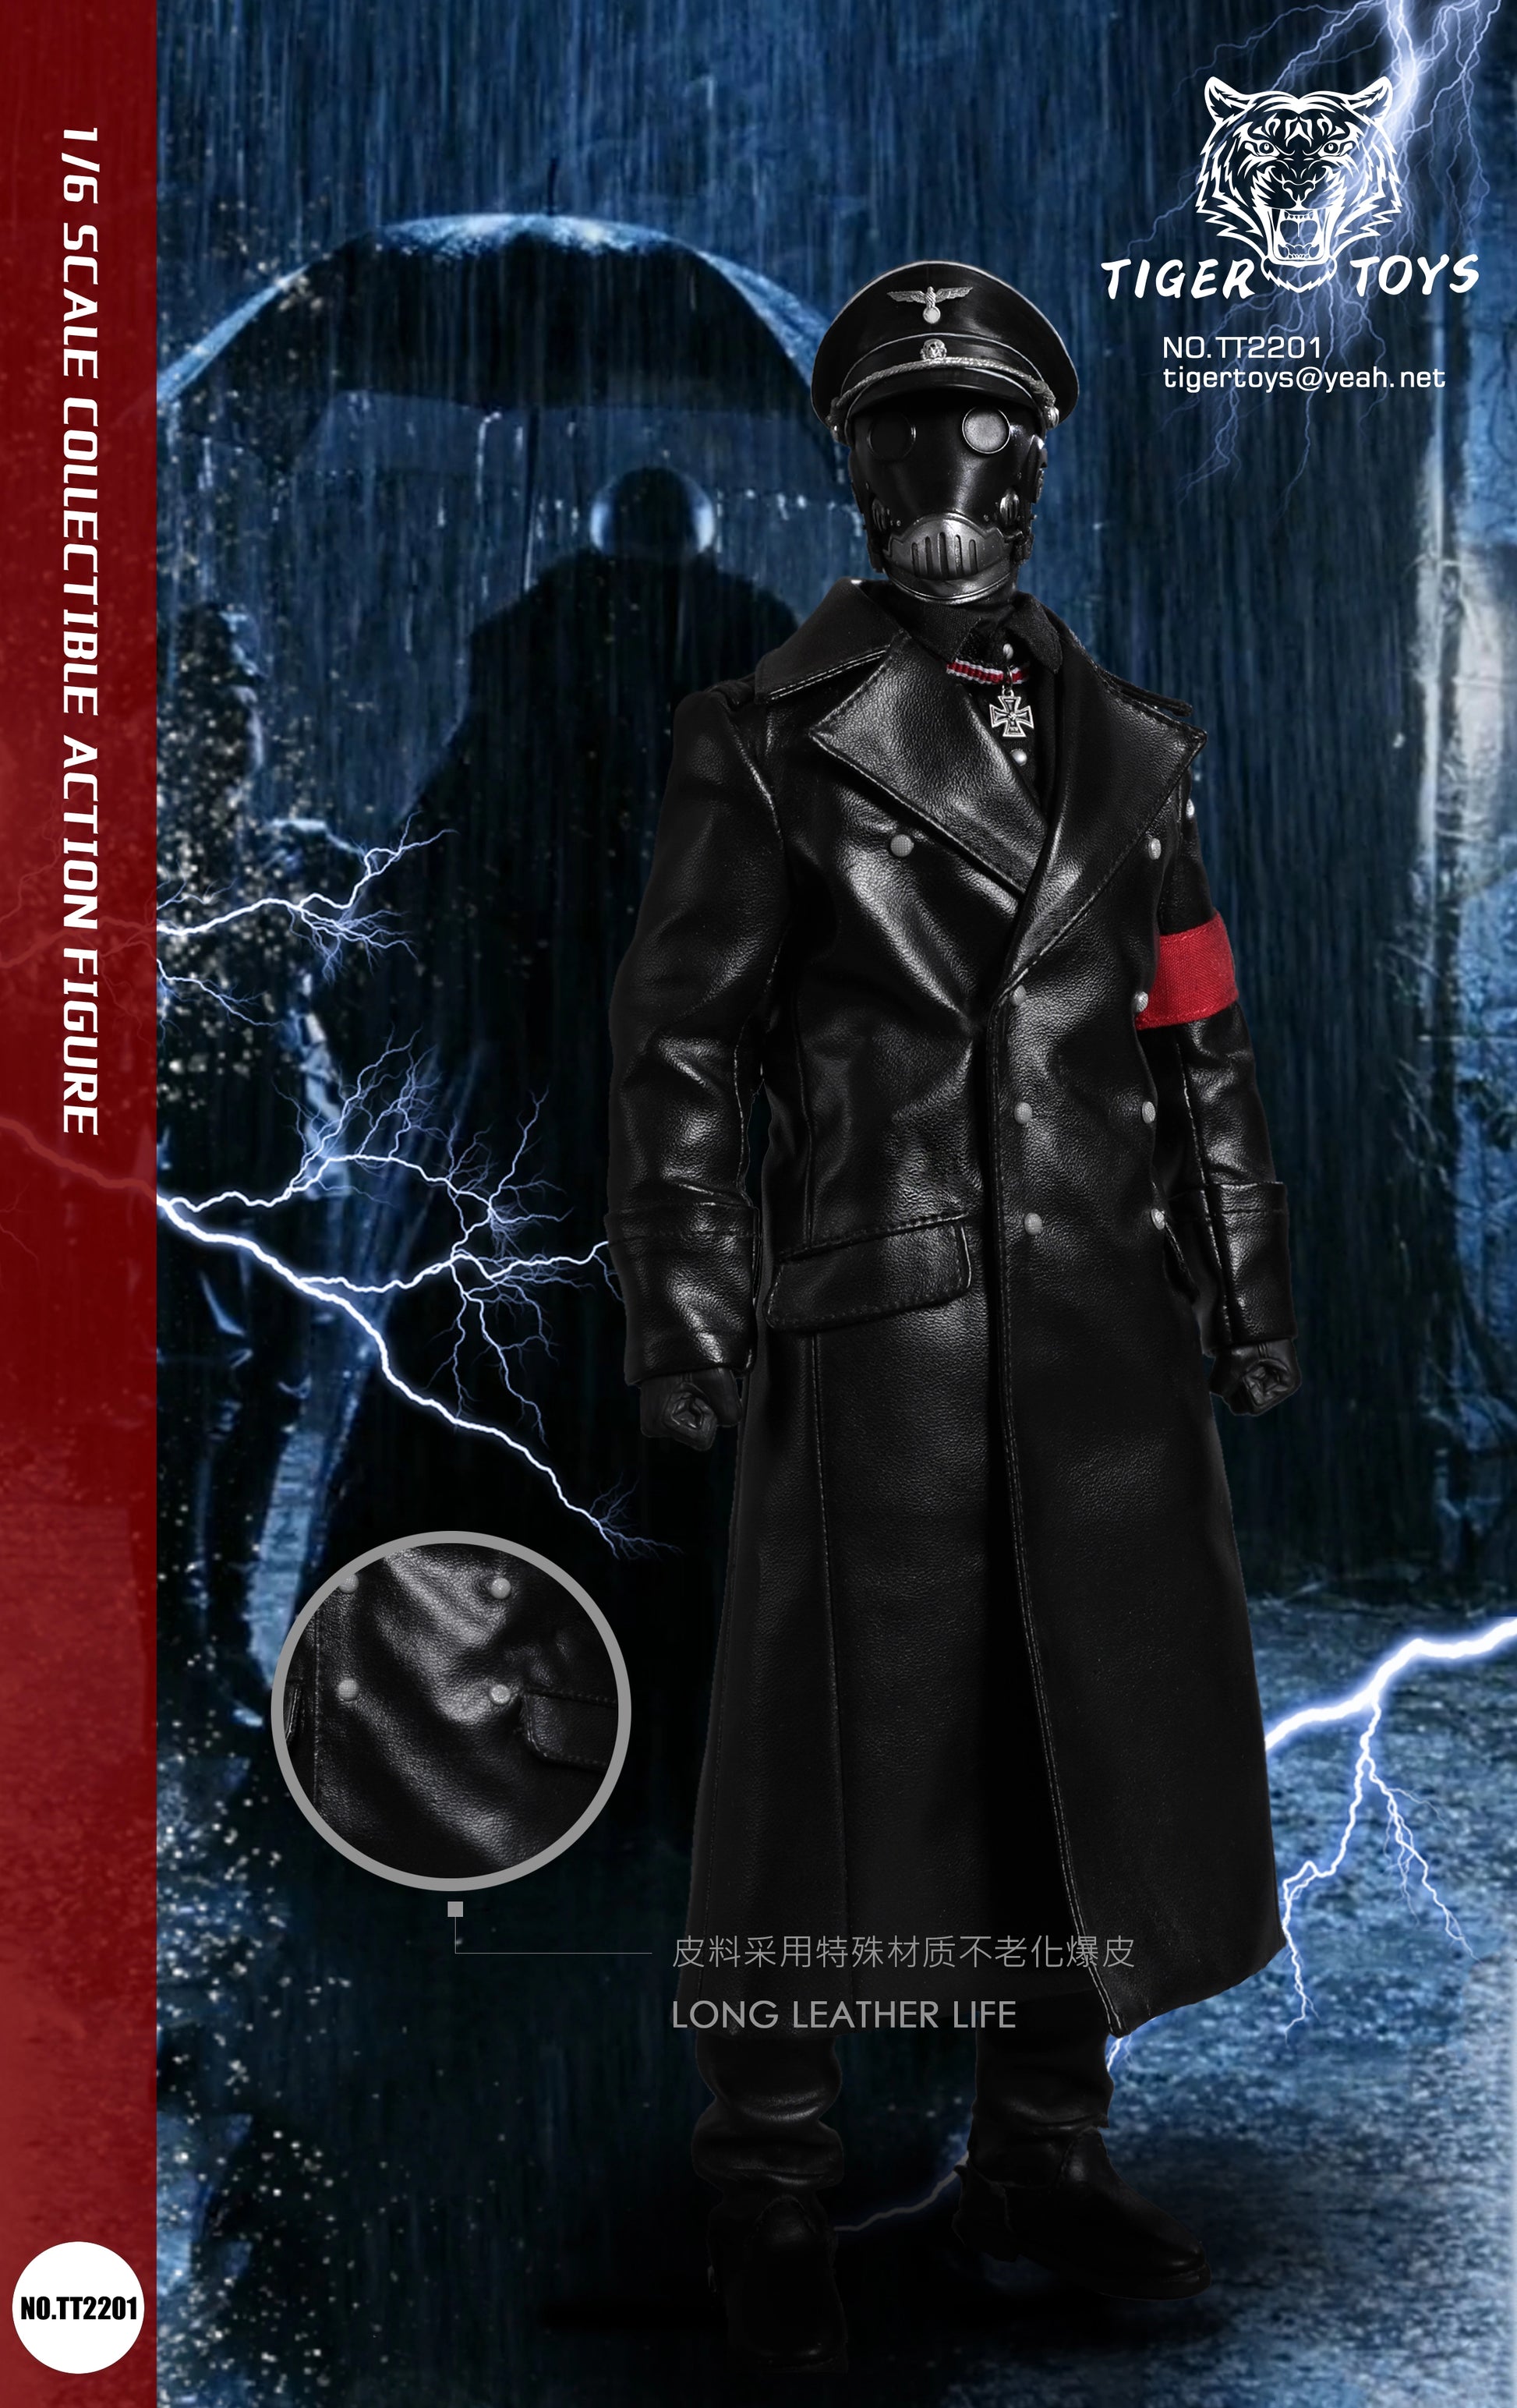 Tiger Toys bring this 1/6 Scale Hell Flame Killer Figure (TG-TT2201) to life!